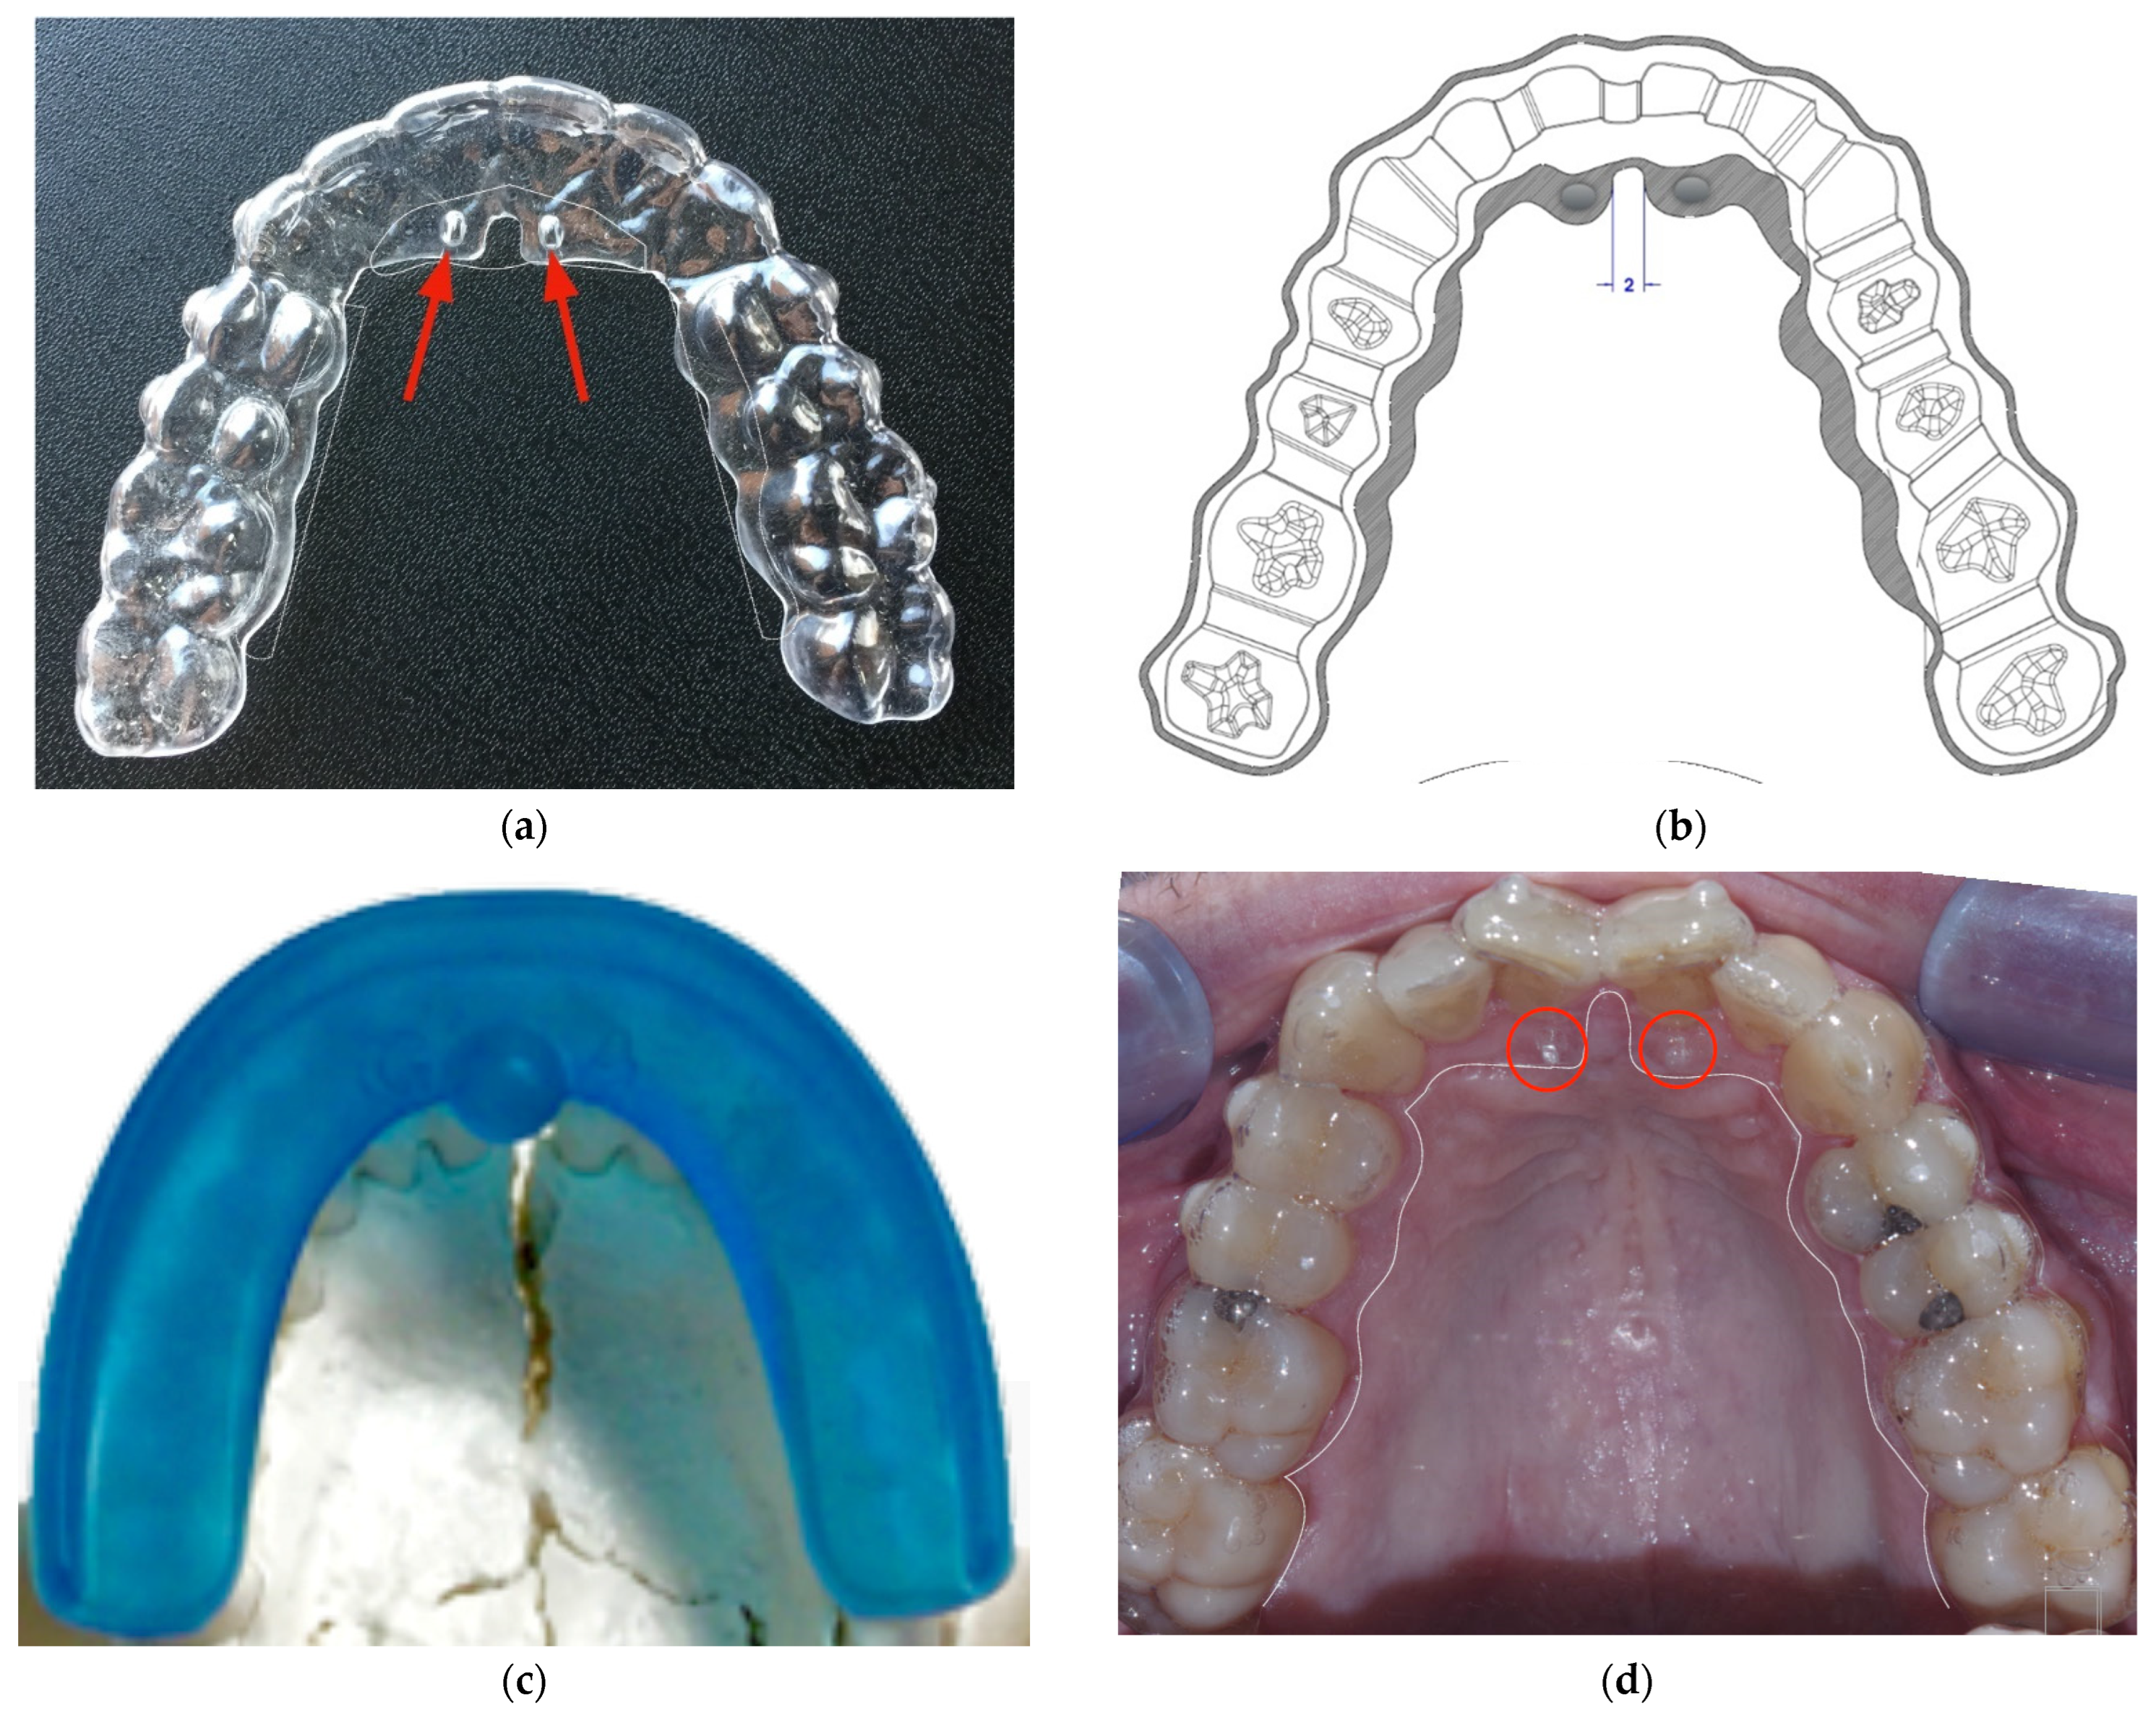 History, Present and Future of Aligners